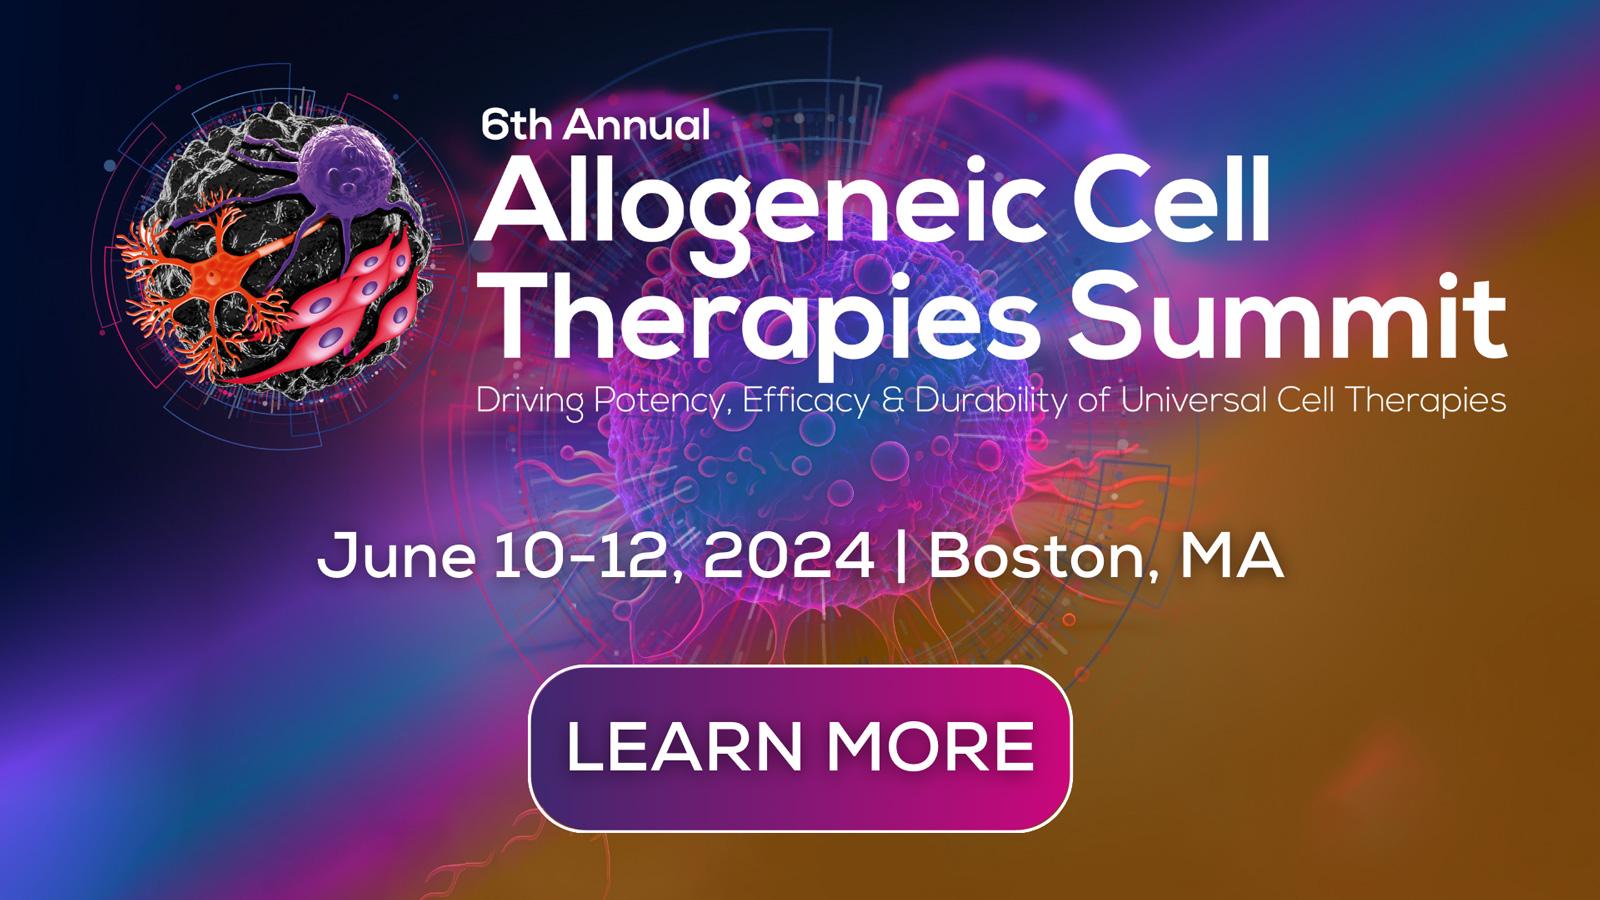 6th Allogeneic Cell Therapies Summit banner